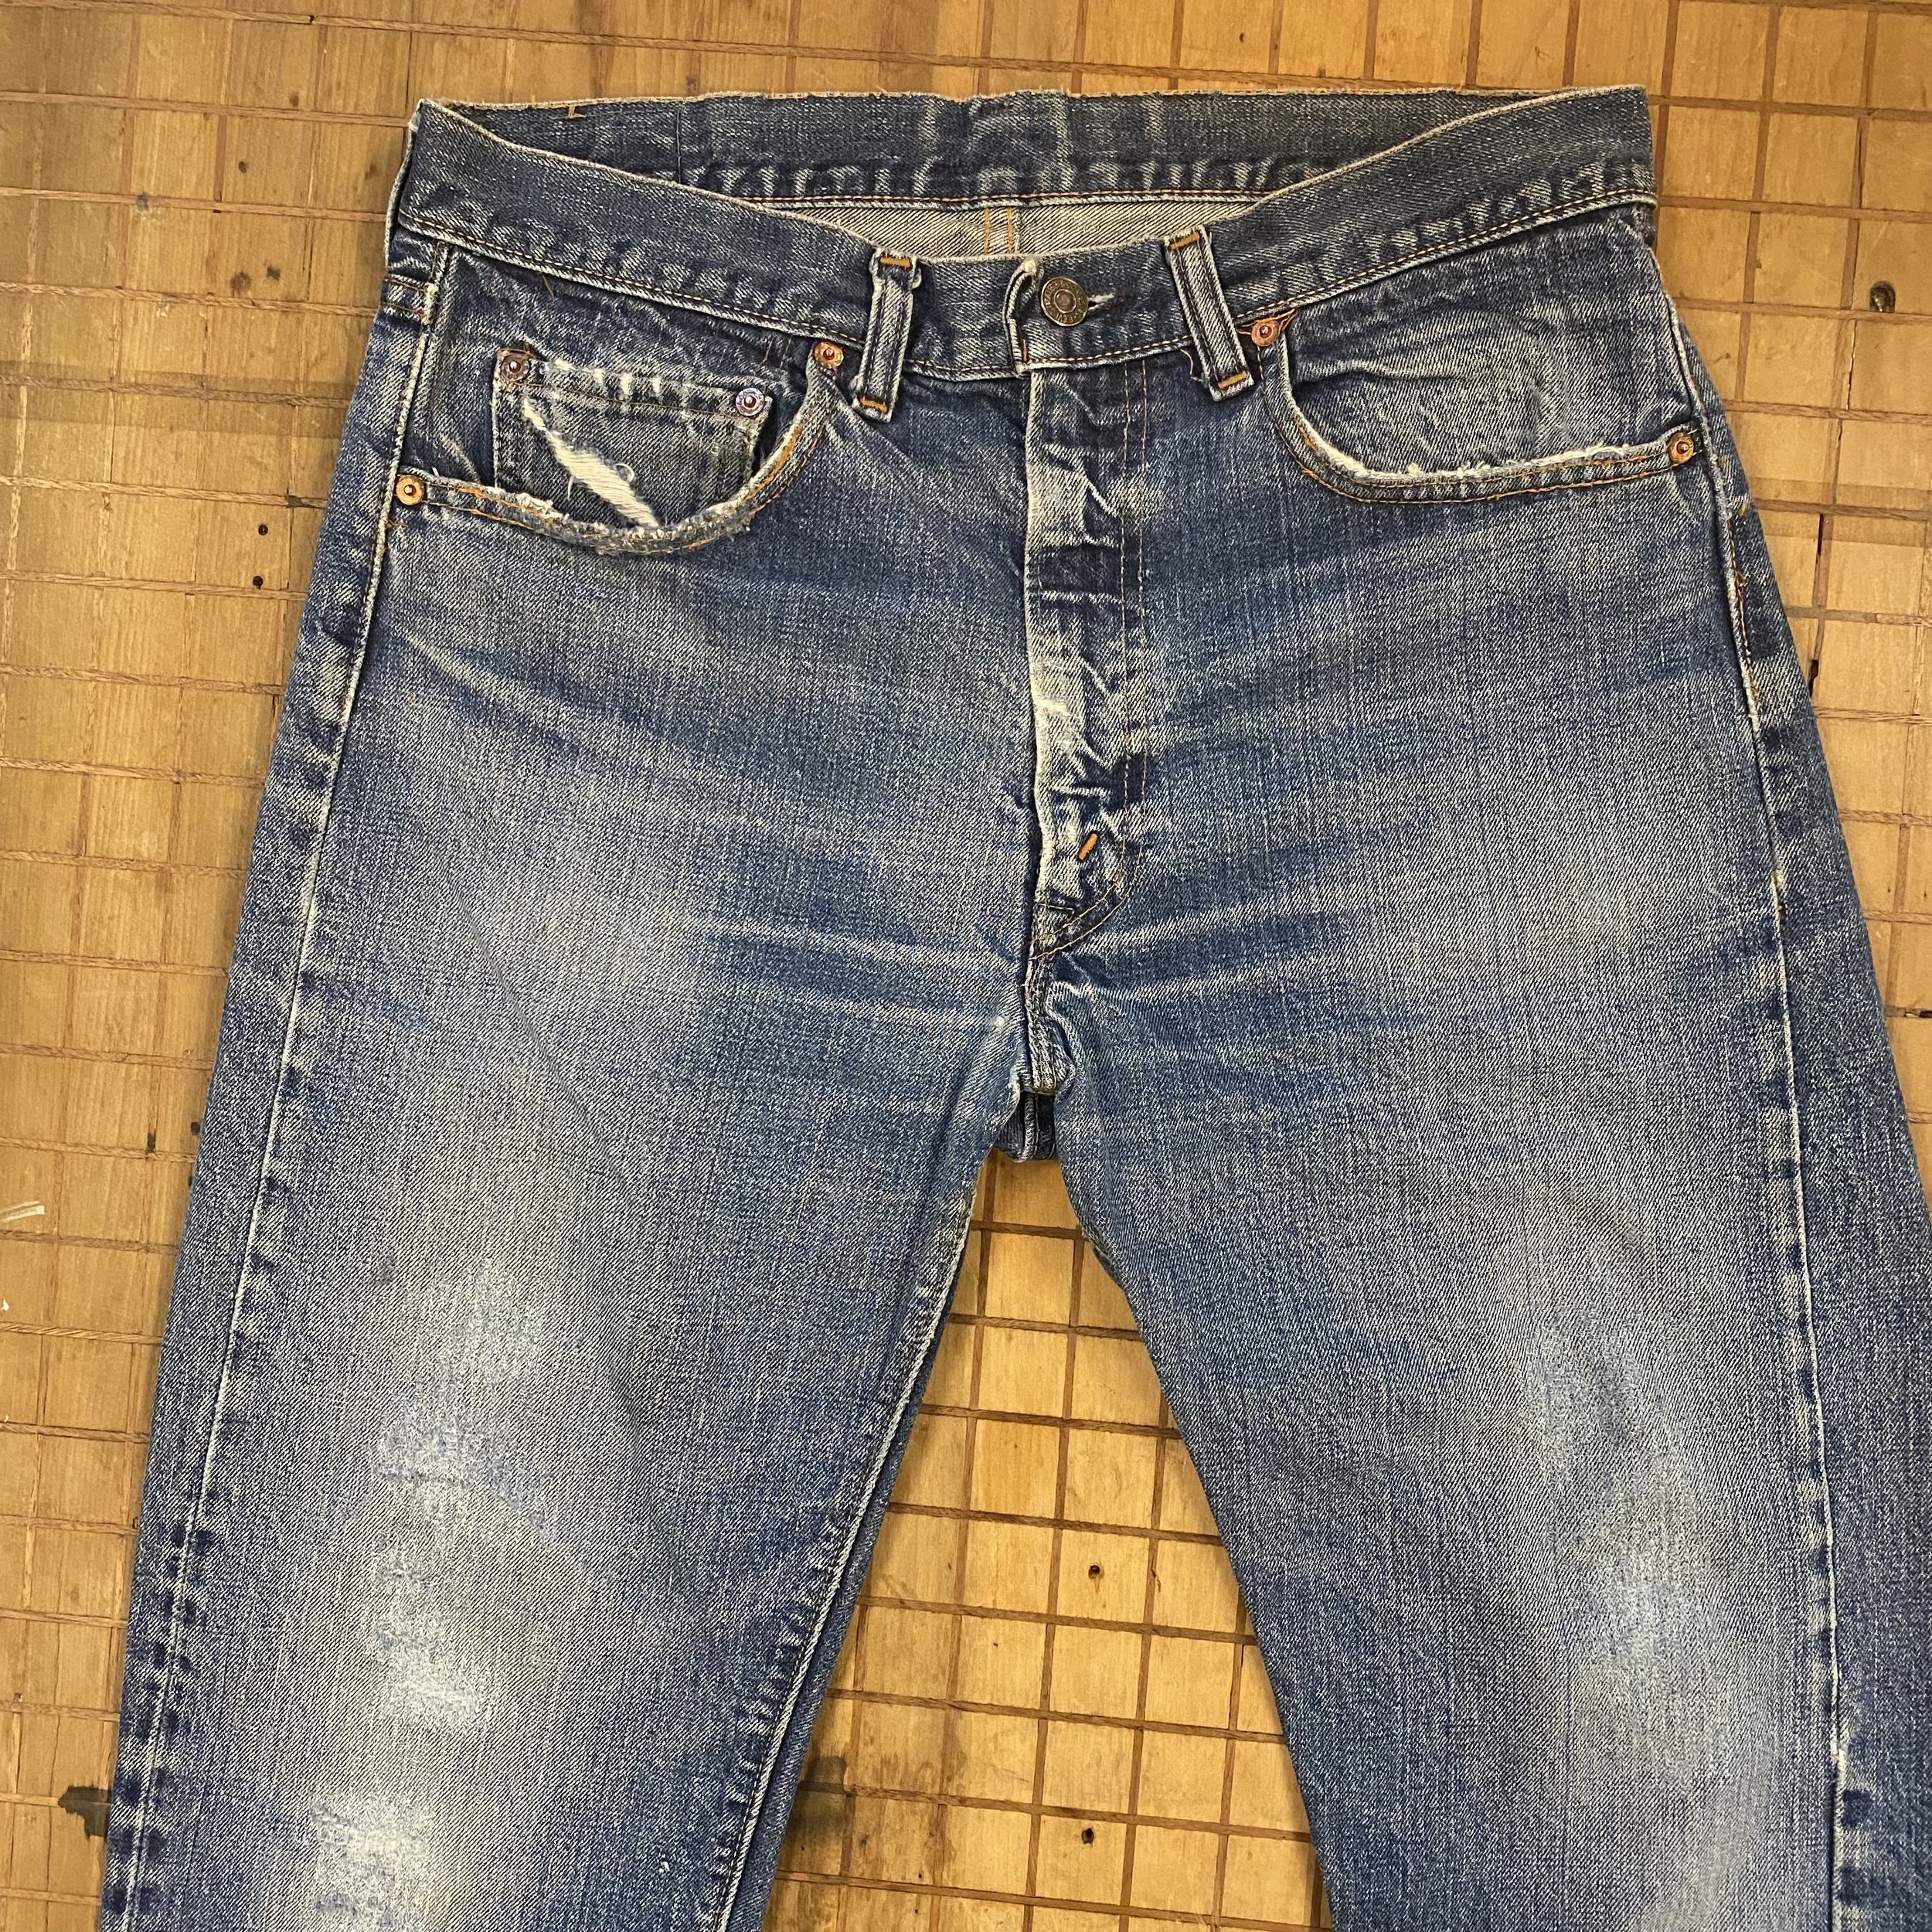 Replace Buttons, Rivets & Repair Torn Buttonholes on Jeans